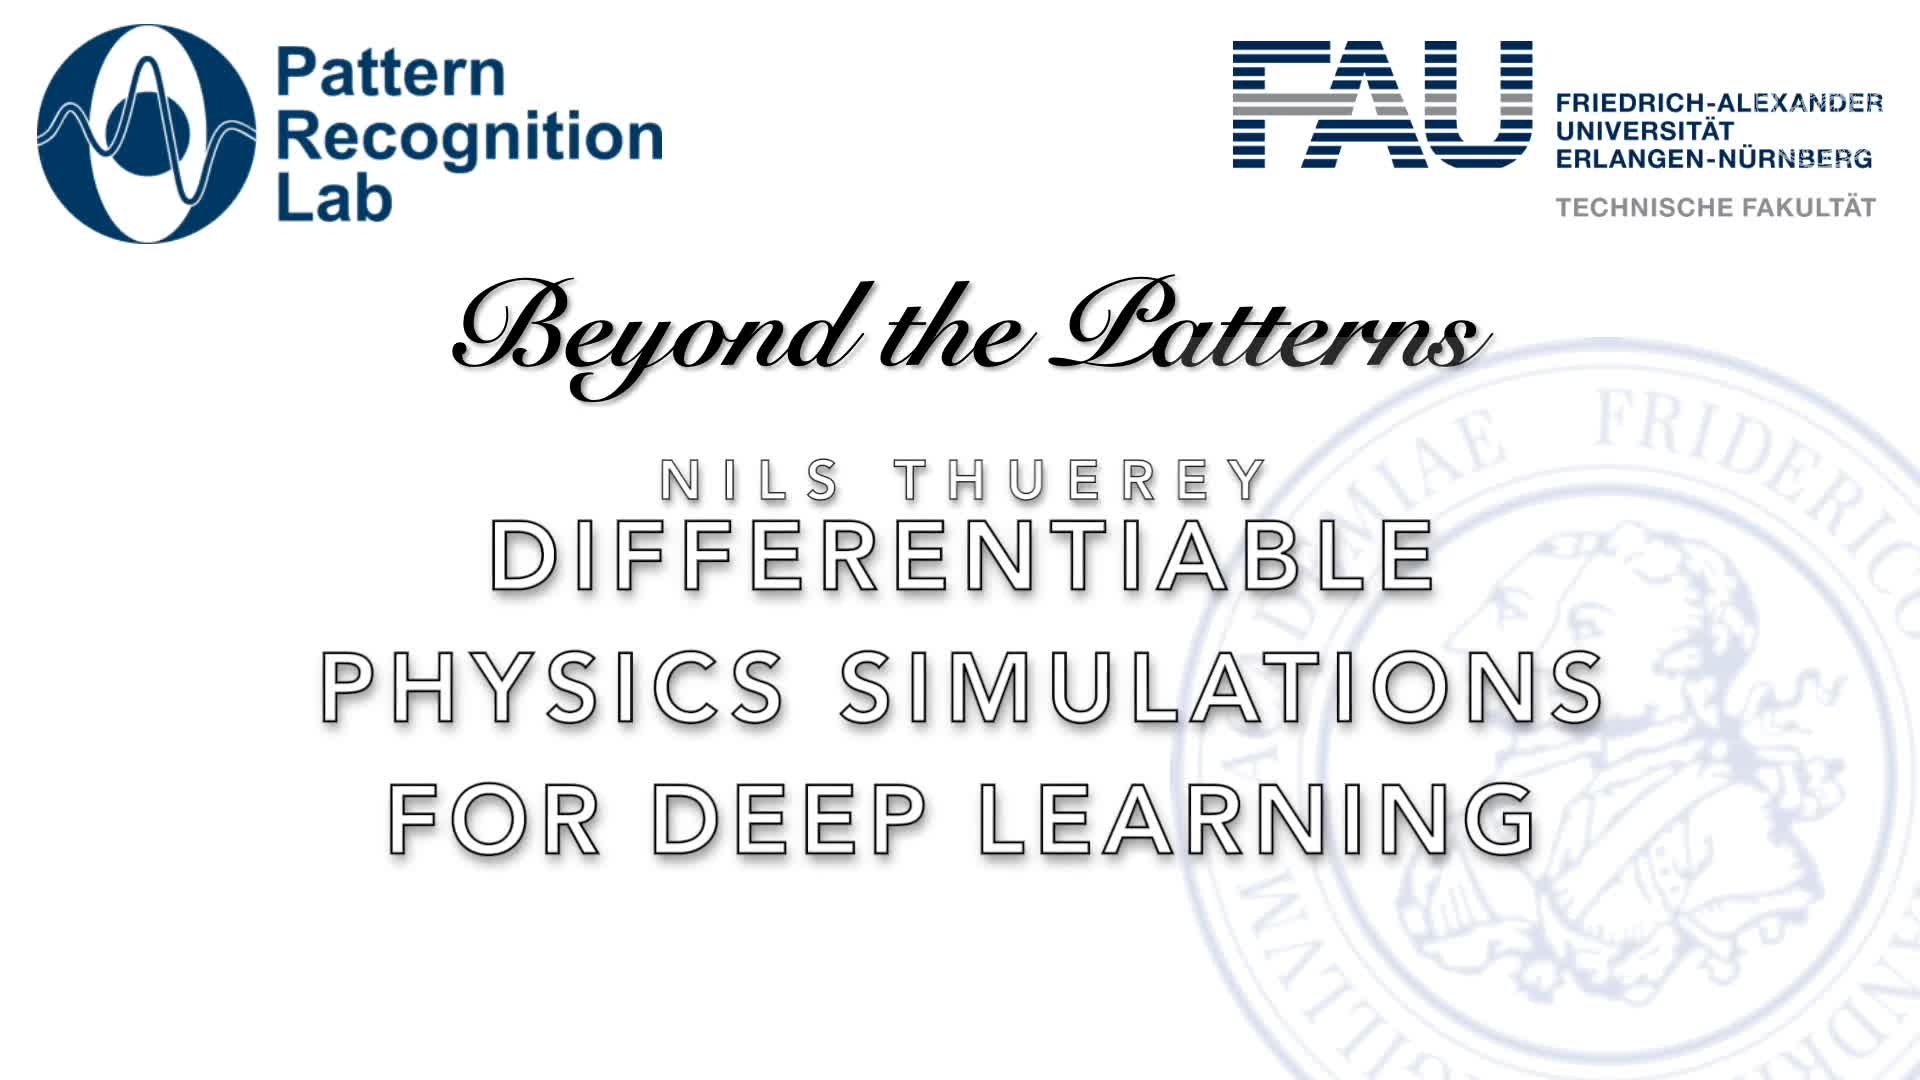 Beyond the Patterns - Nils Thuerey – Differentiable Physics Simulations for Deep Learning preview image